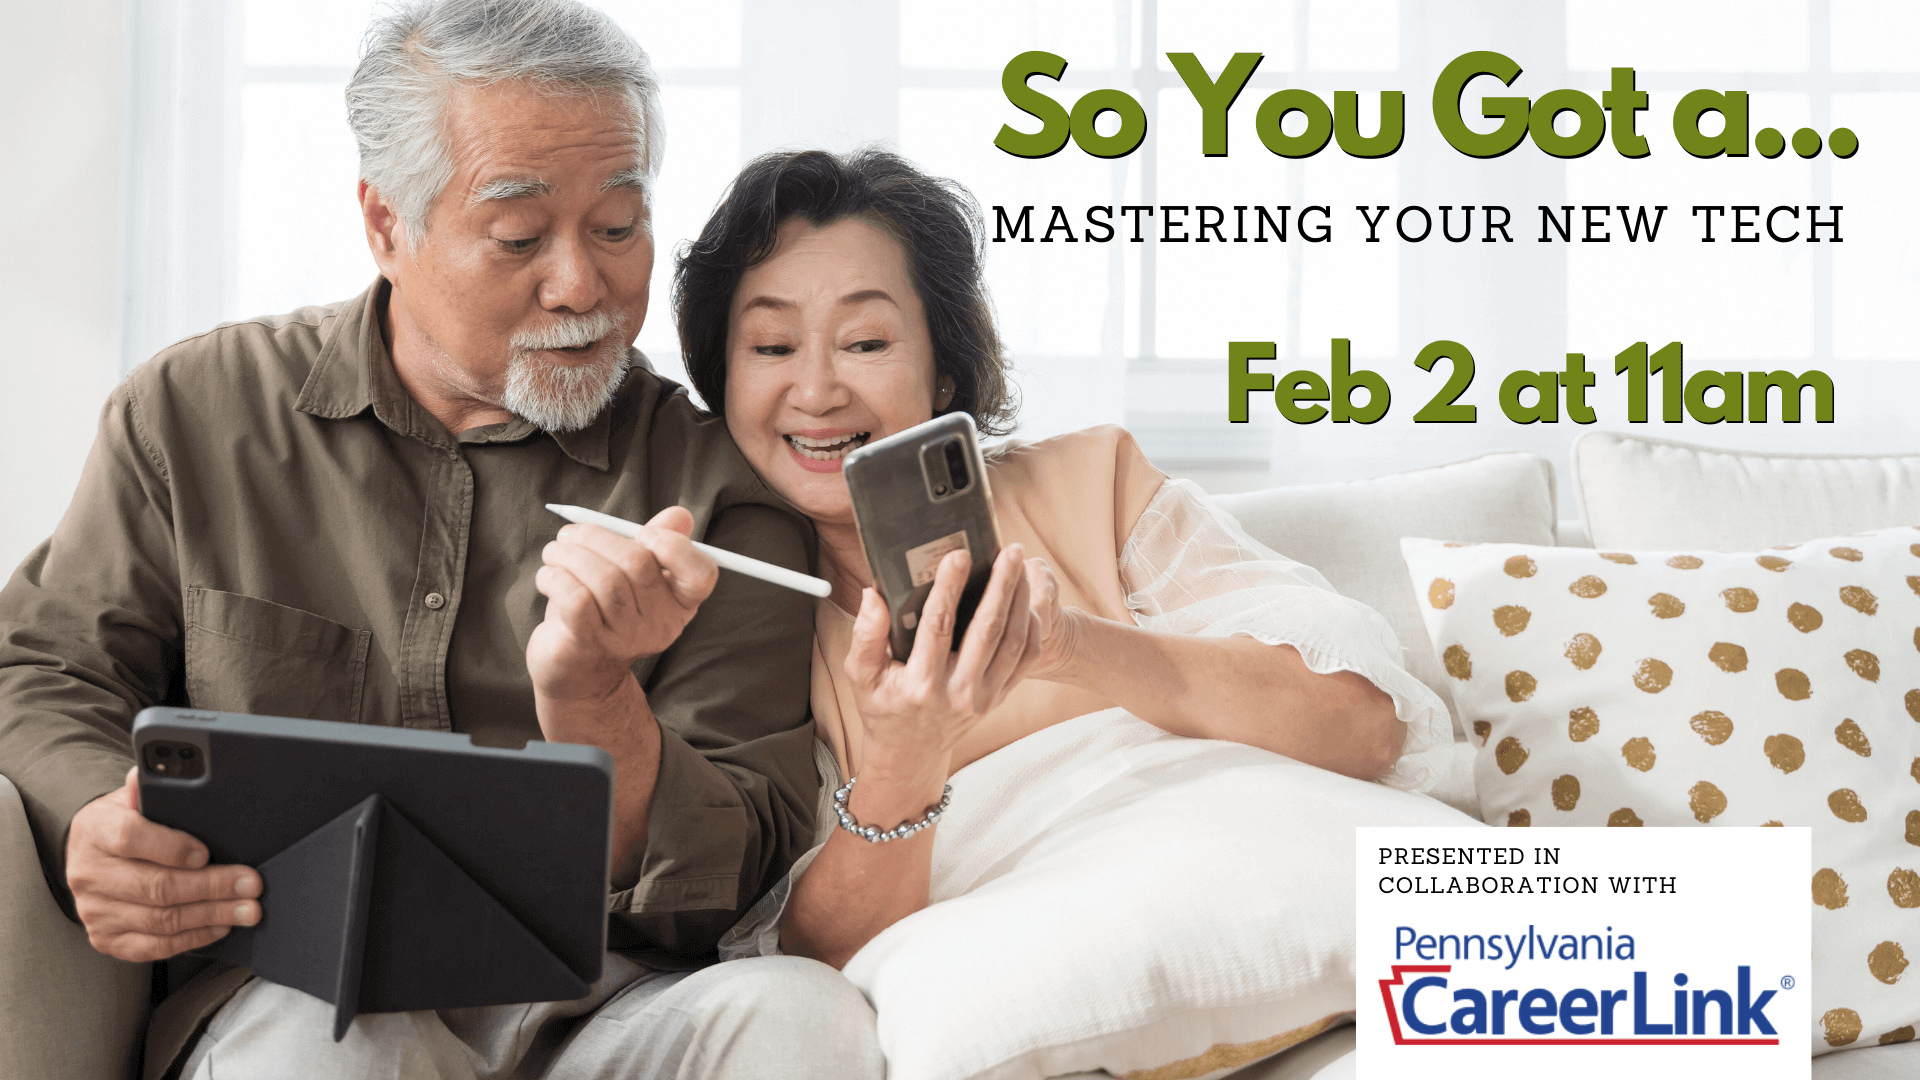 So You Got a...mastering your new tech - Feb 2 at 11am